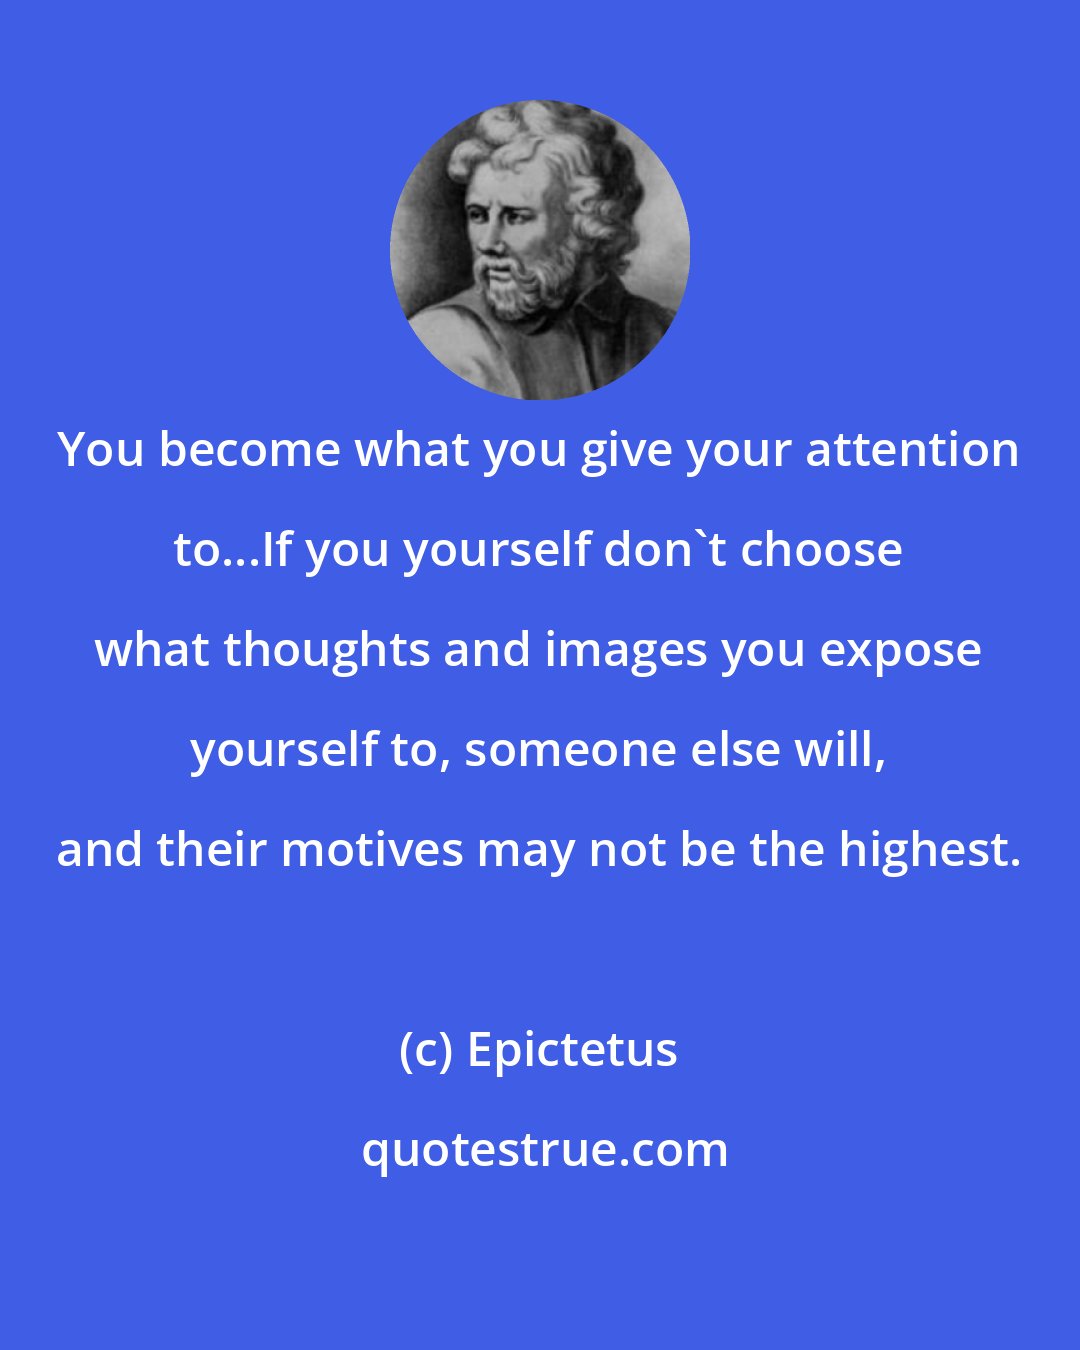 Epictetus: You become what you give your attention to...If you yourself don't choose what thoughts and images you expose yourself to, someone else will, and their motives may not be the highest.